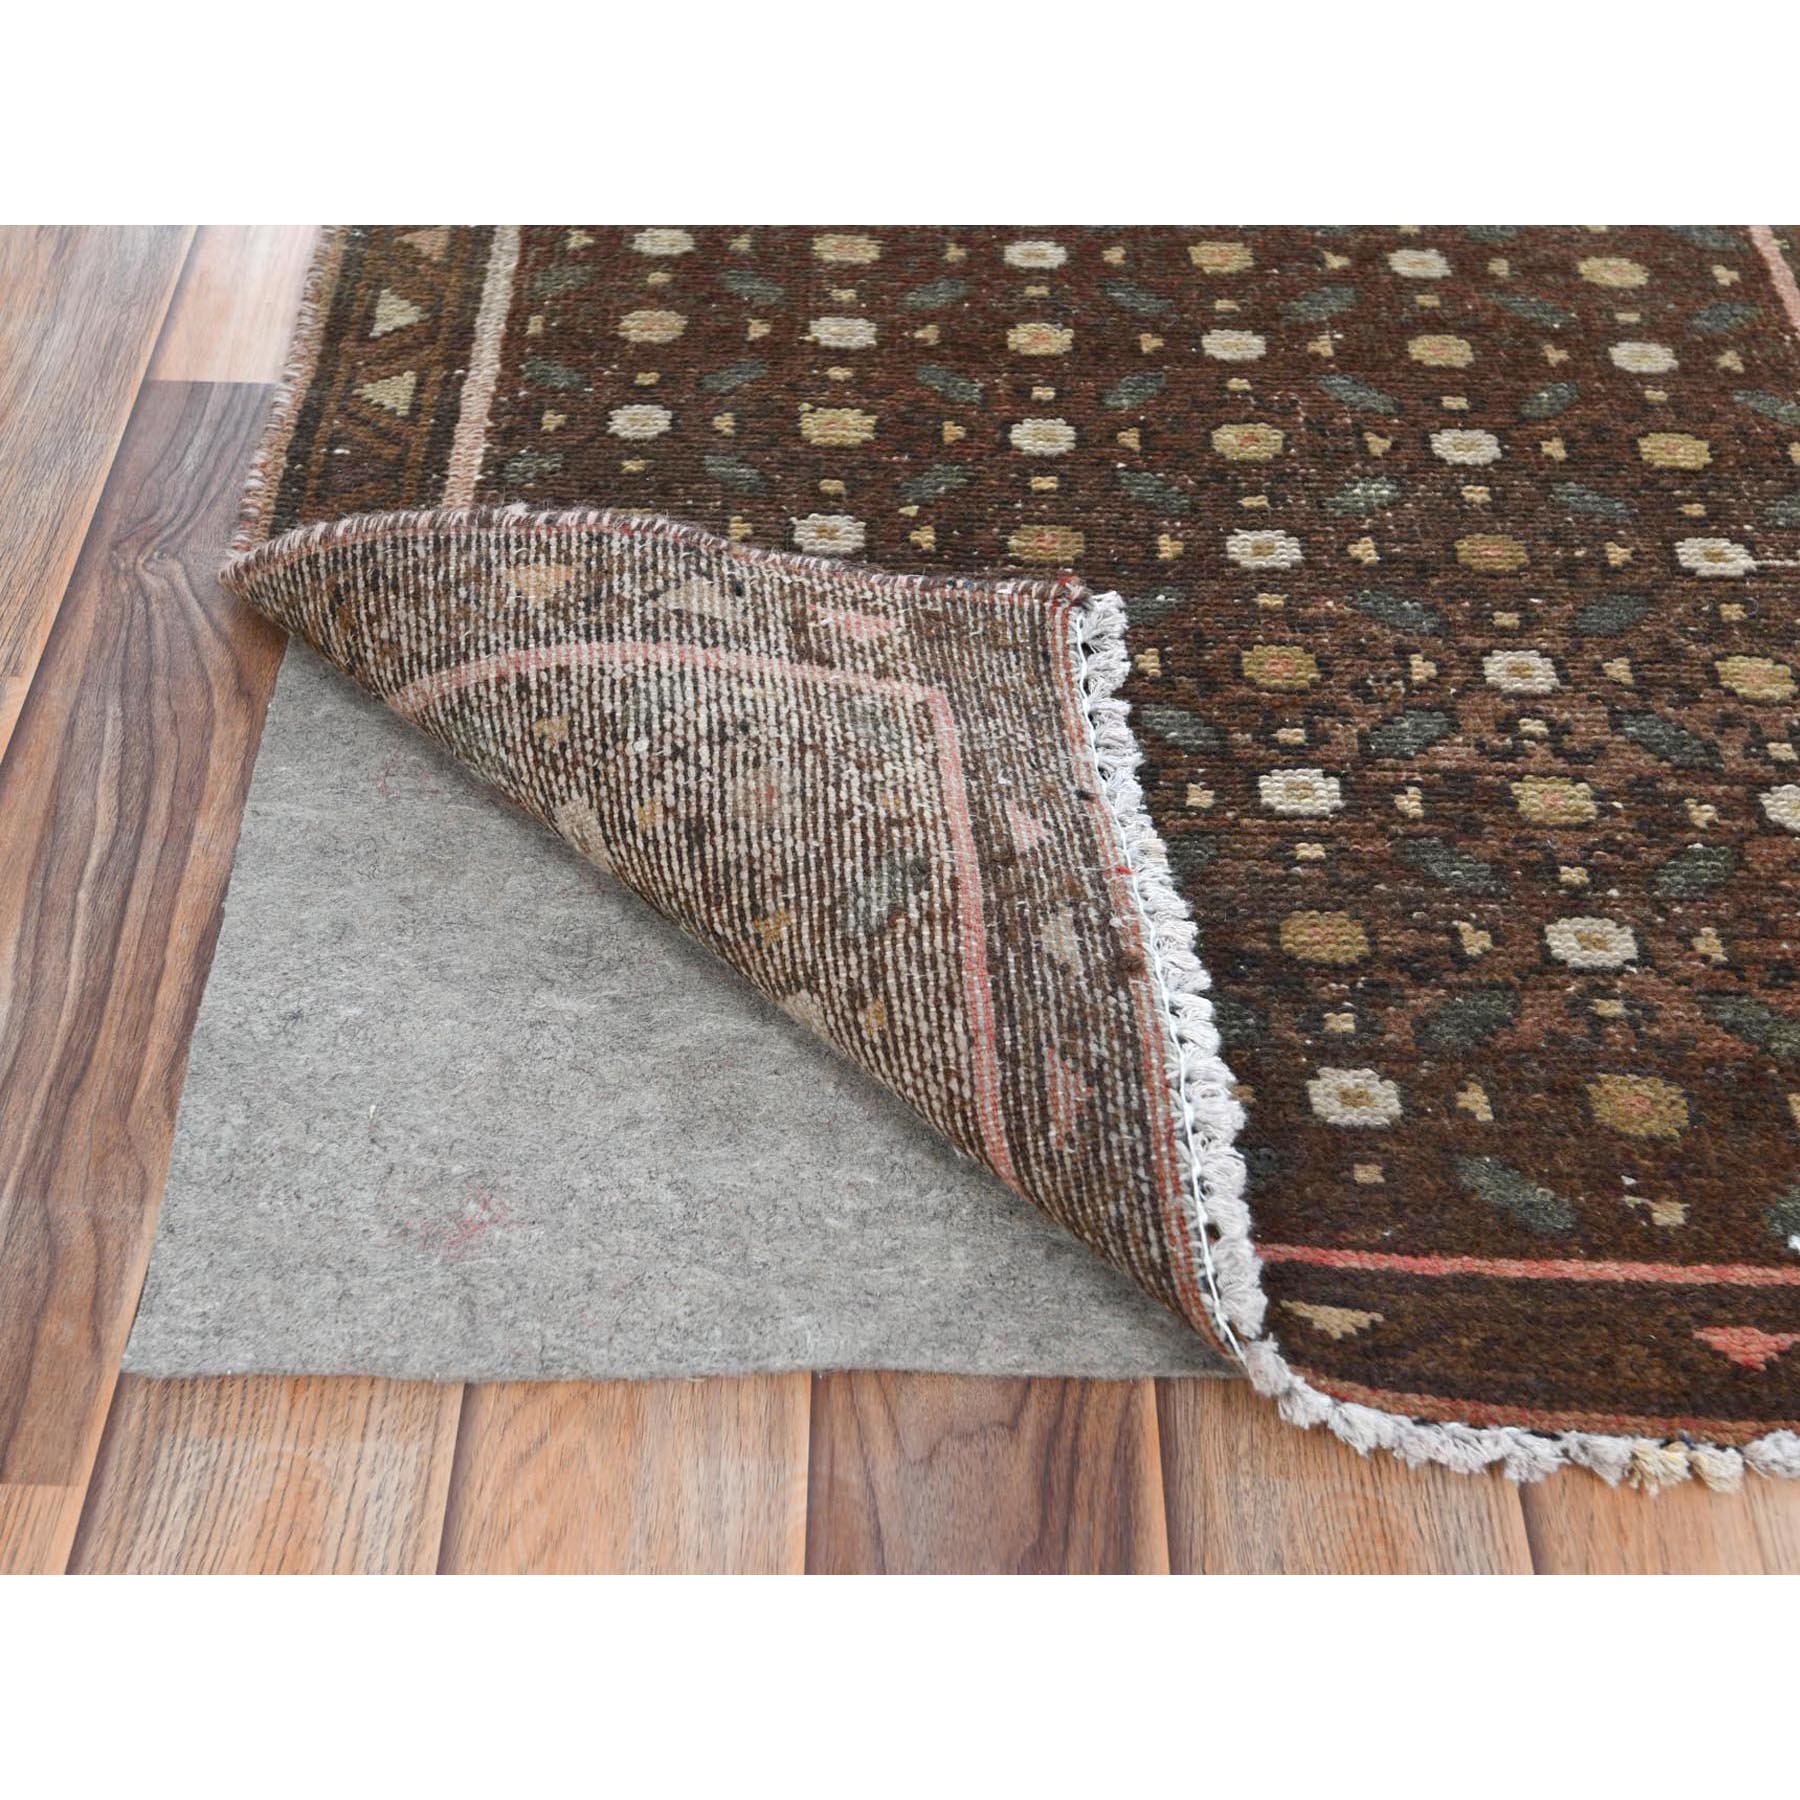 2'4"x9'2" Chocolate Brown, Abrash, Vintage Persian Hamadan with All Over Repetitive Design, Hand Woven, Pure Wool, Worn Down, Distressed Look Narrow Runner Oriental Rug 